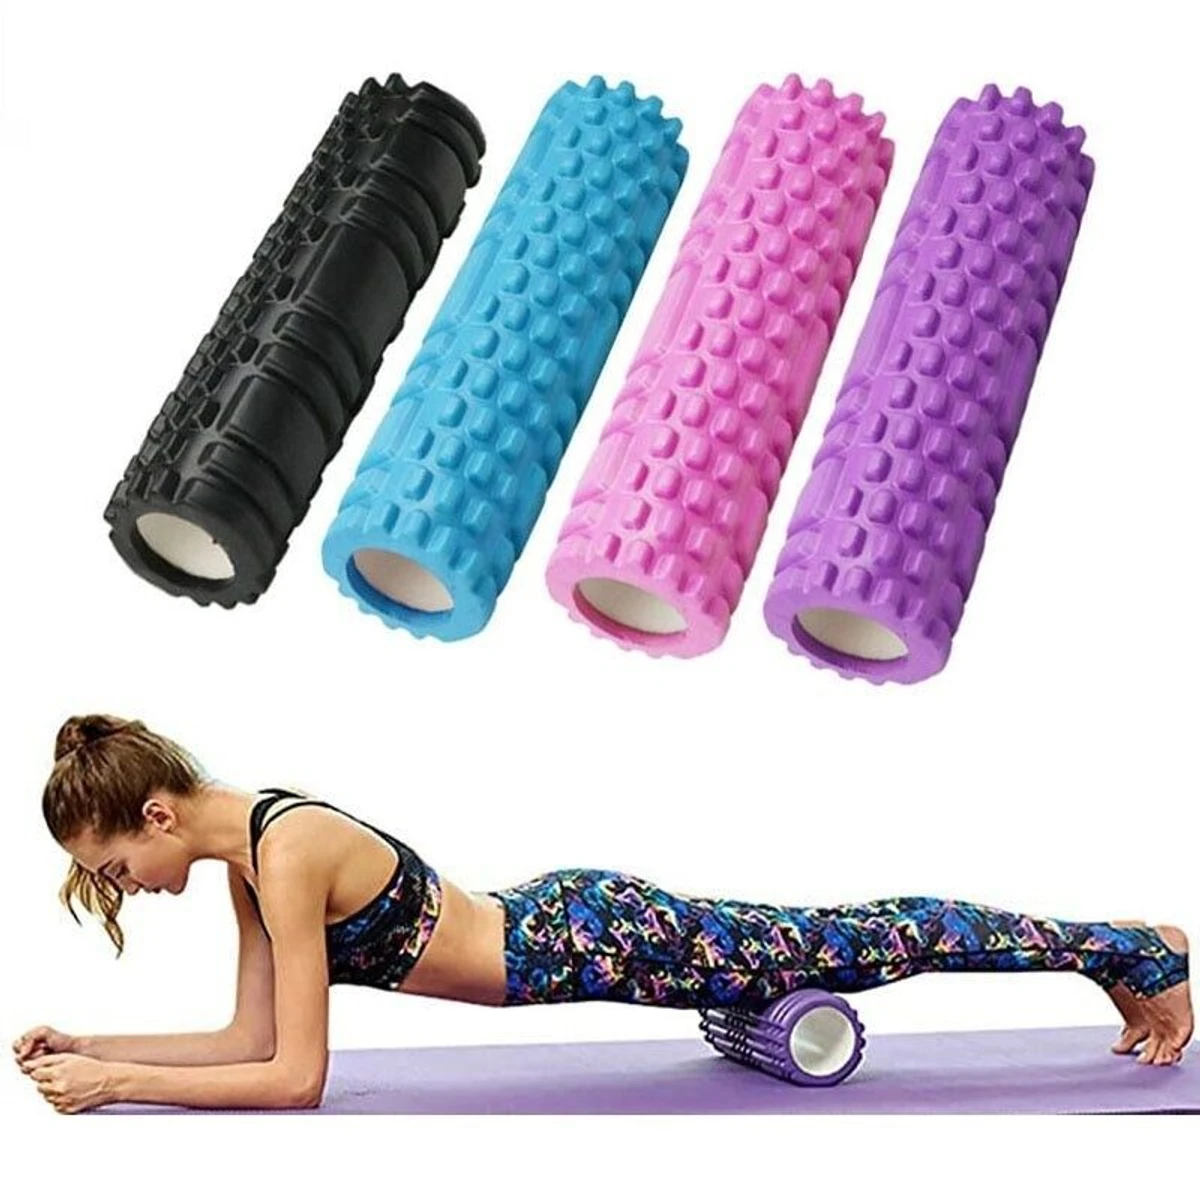 Fitness High Density Foam Roller Exercise Back Muscle Pilates Yoga Training Massage Physiotherapy